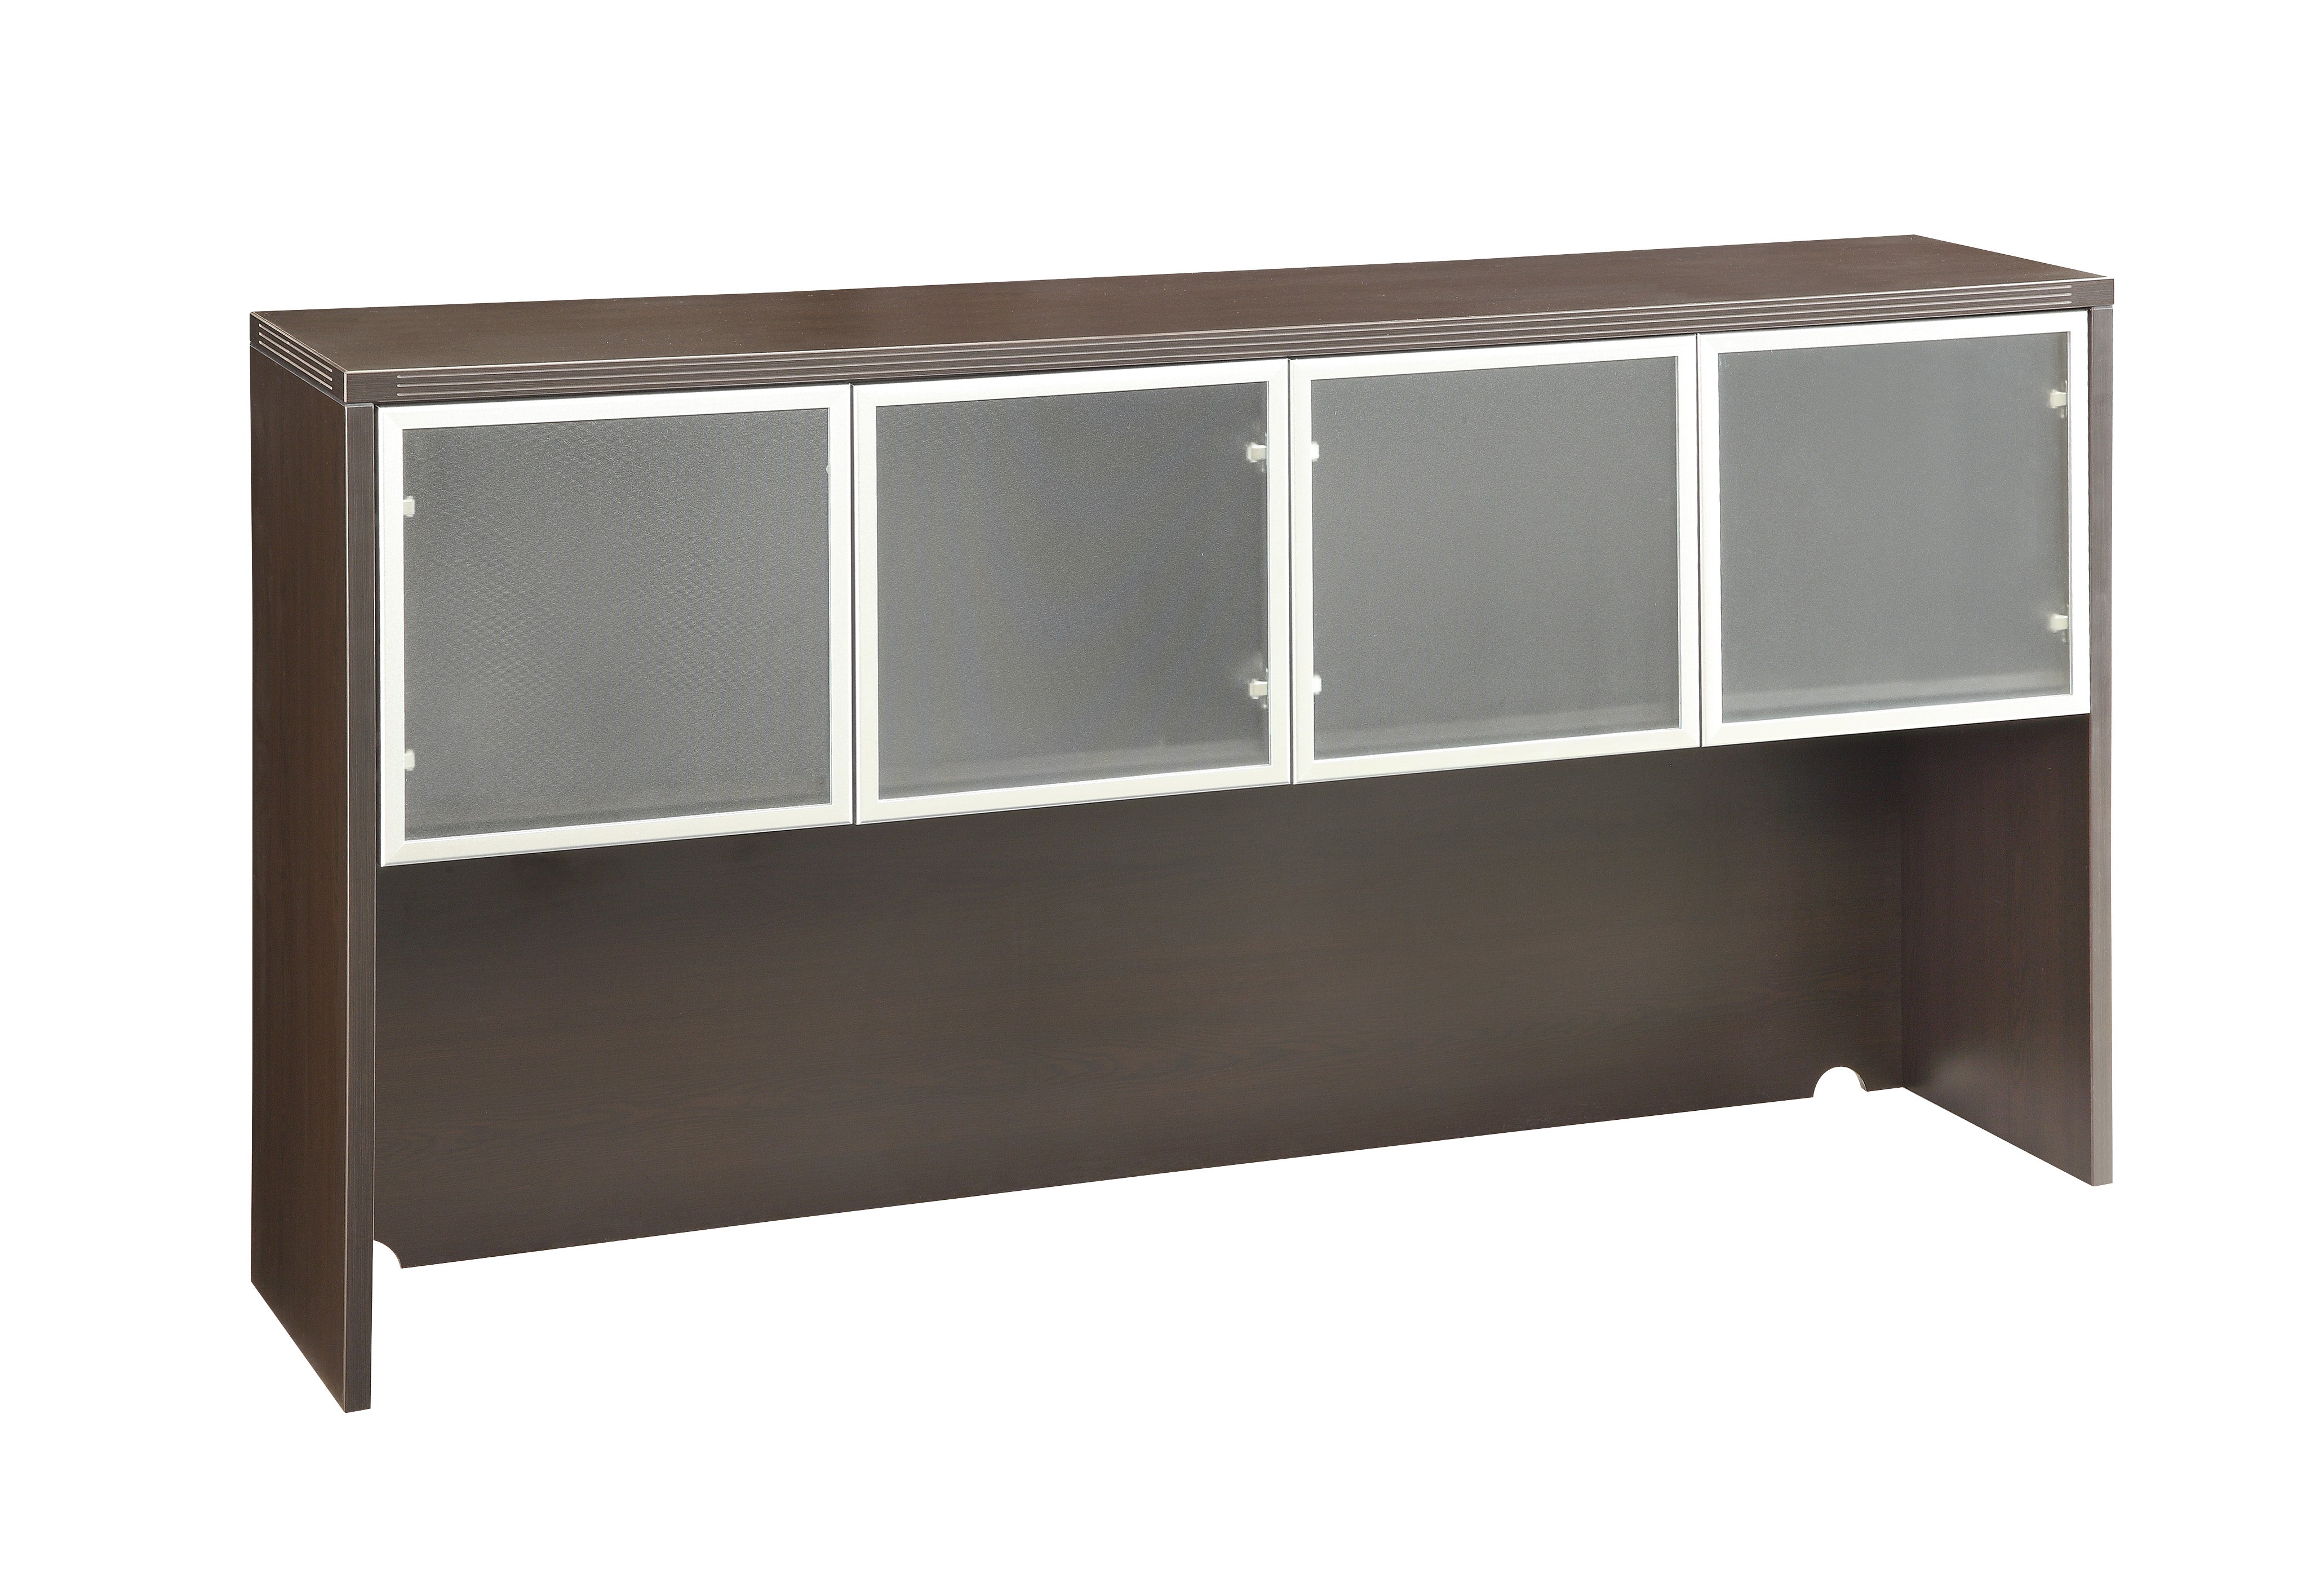 NAP42 - Napa Series Hutch with Glass Doors/Aluminum Trim by OSP